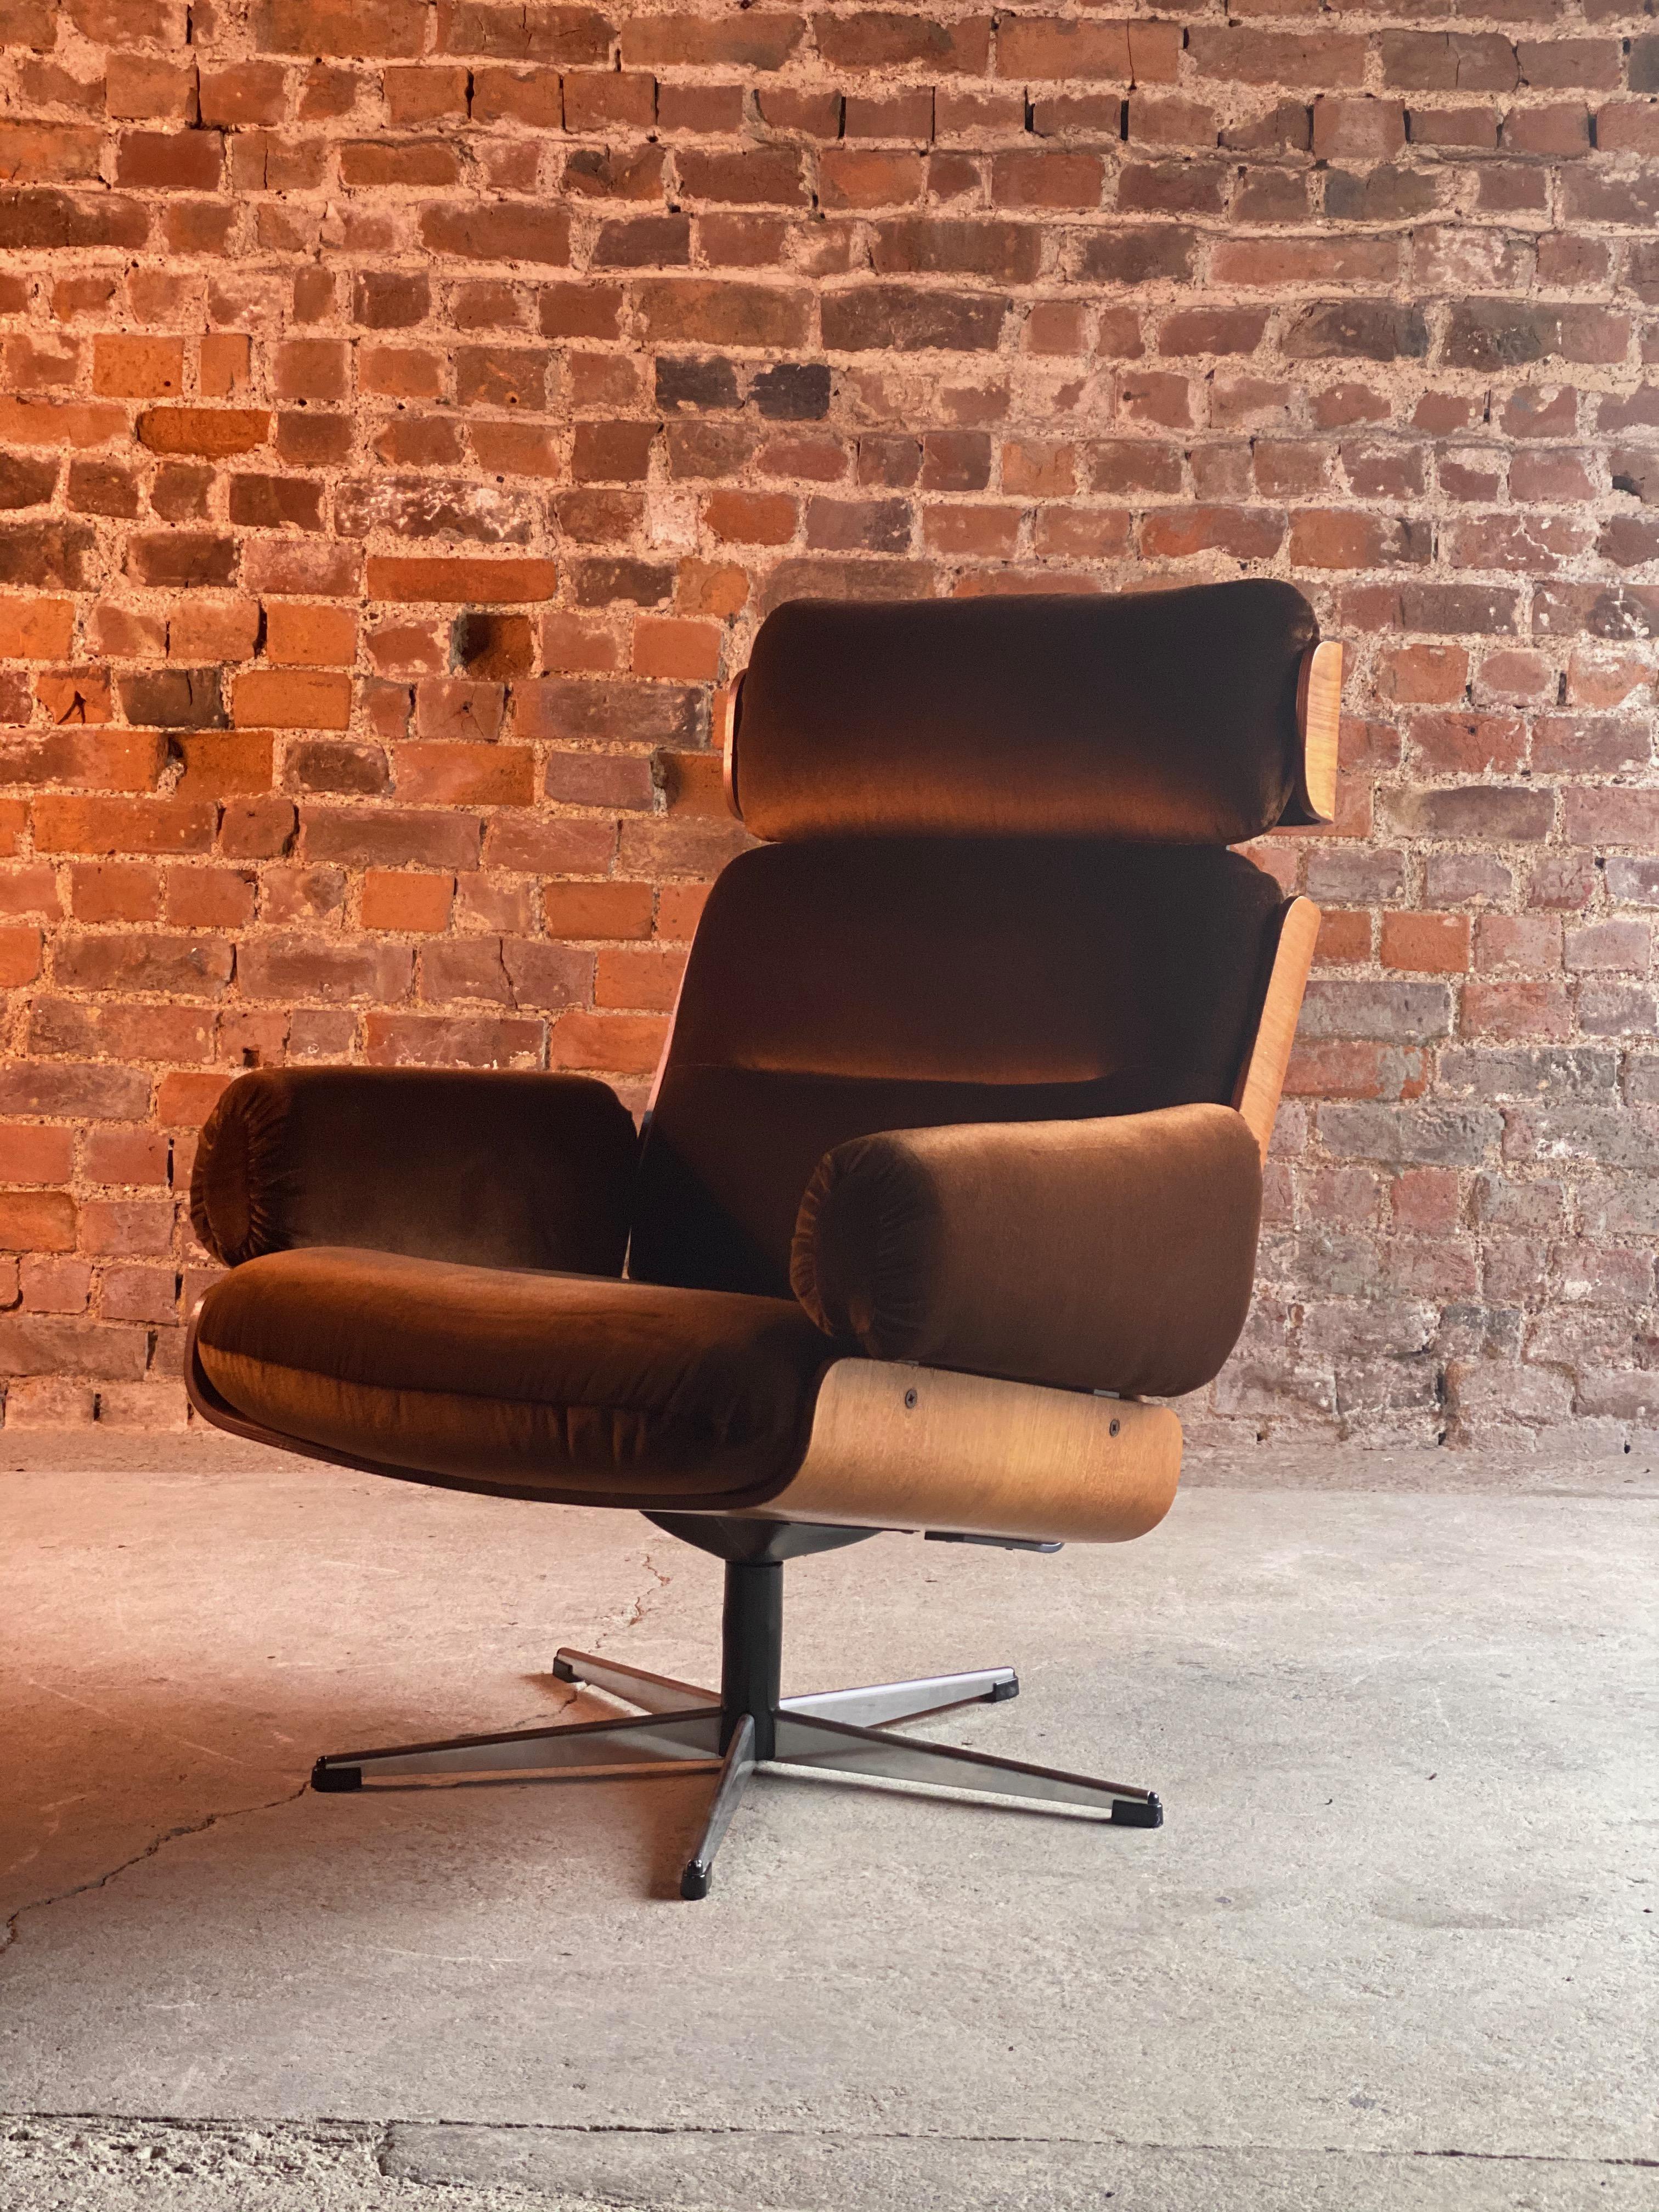 Mid-20th Century Guy Rogers Lounge Chair Eames Plycraft Style Mad Men Era Midcentury, 1960s